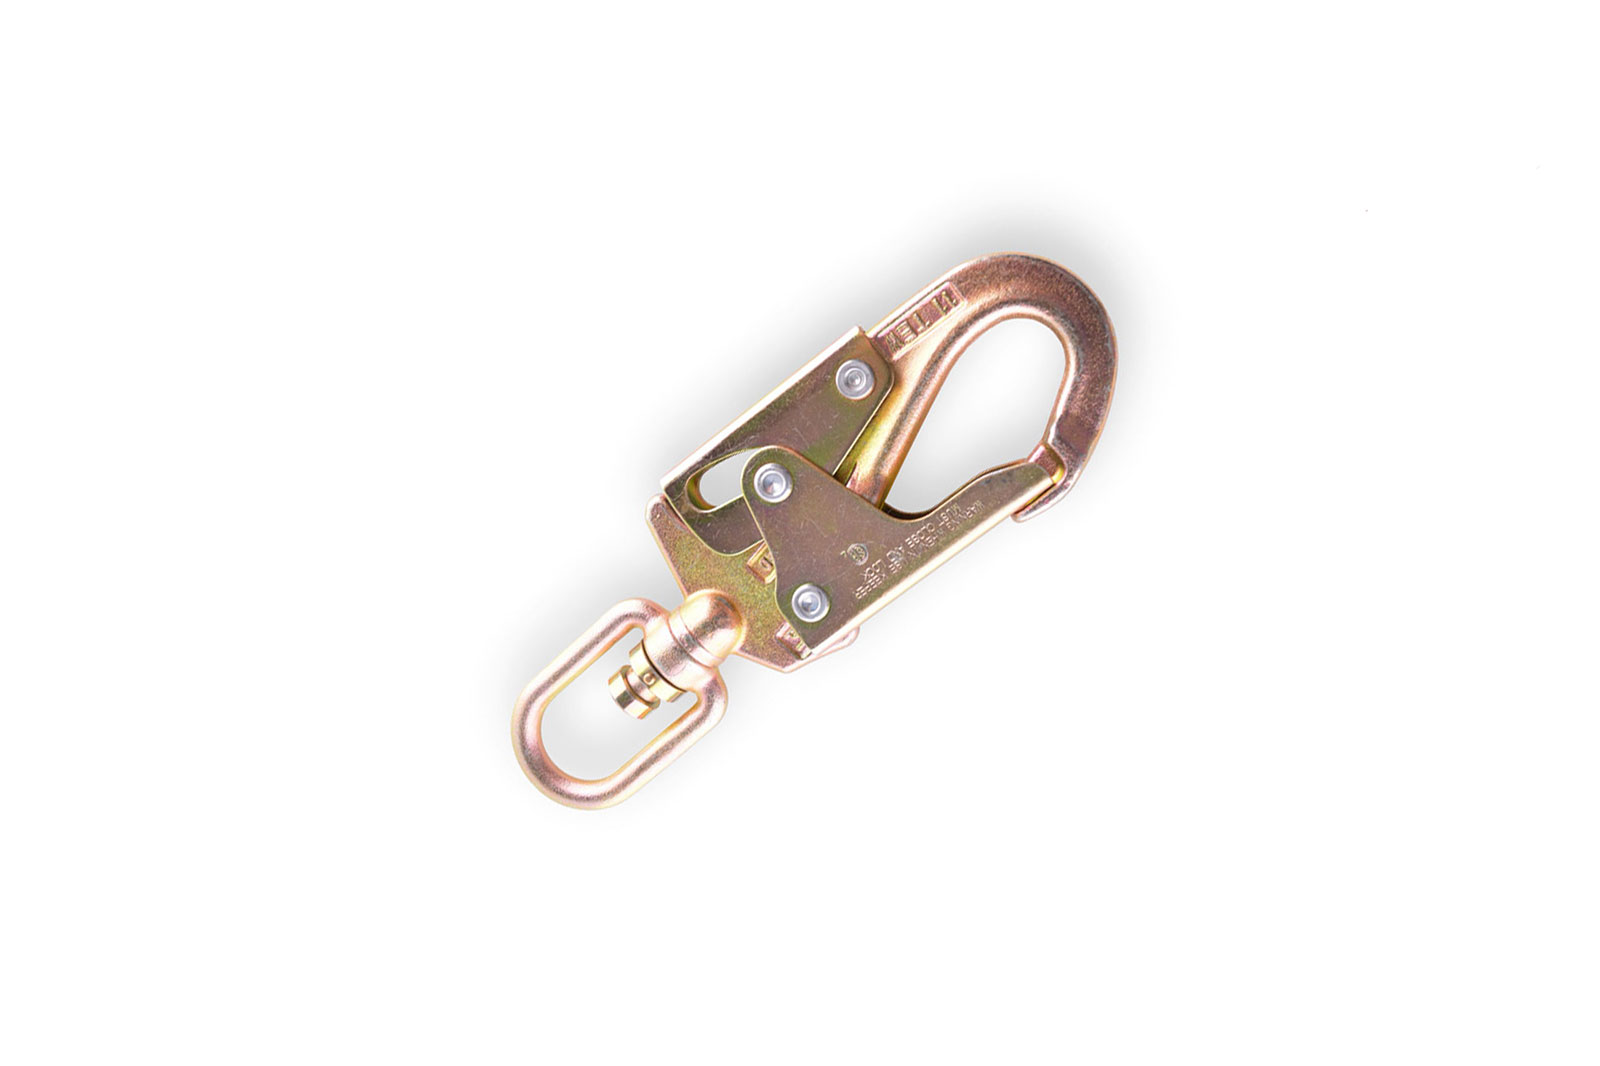 Swivel steel snap hook with fall indicator